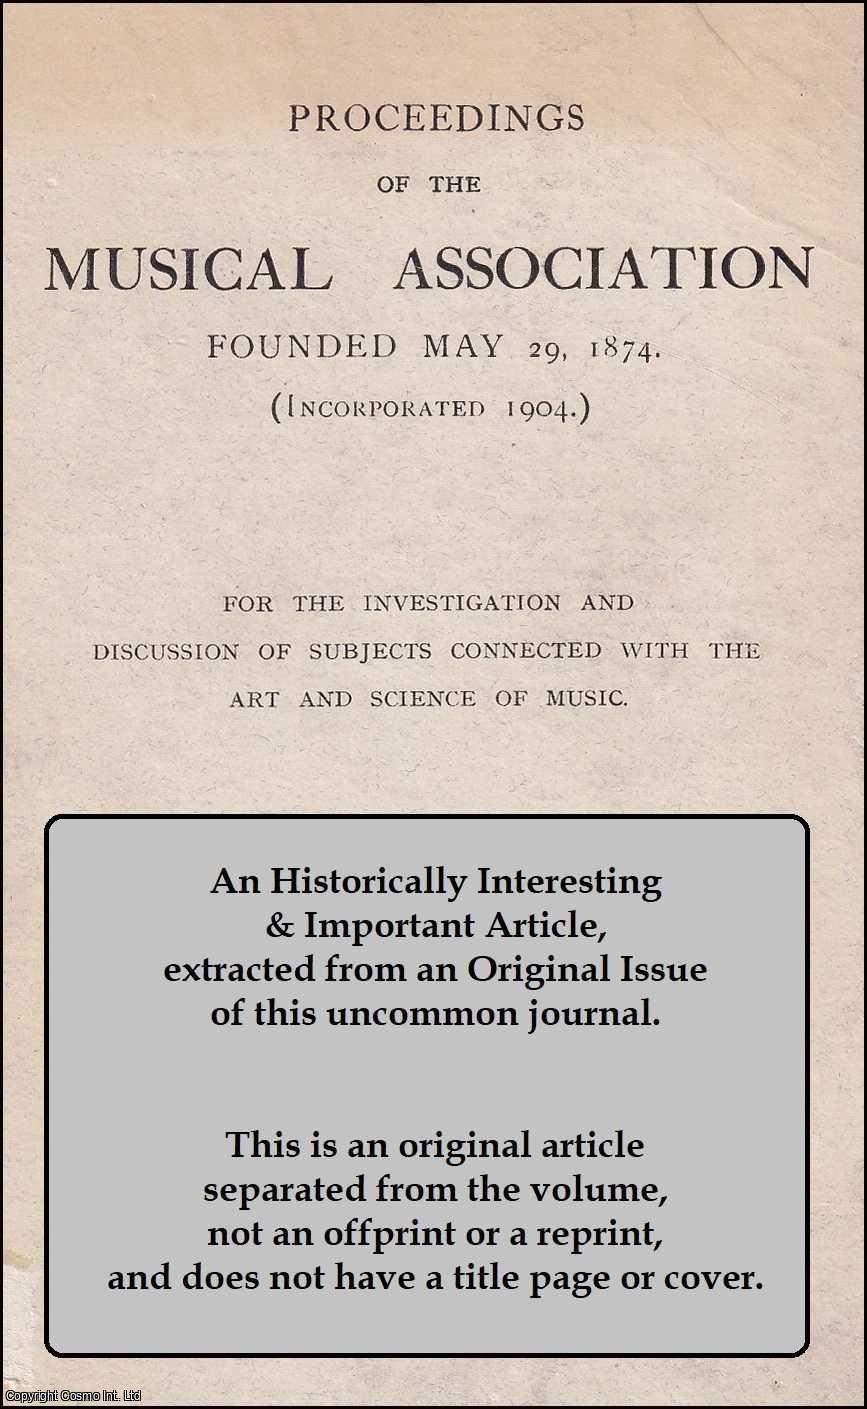 M. D. Calvocoressi - Mussorgsky's Youth and Early Development. An original article from The Proceedings of The Musical Association, 1934.